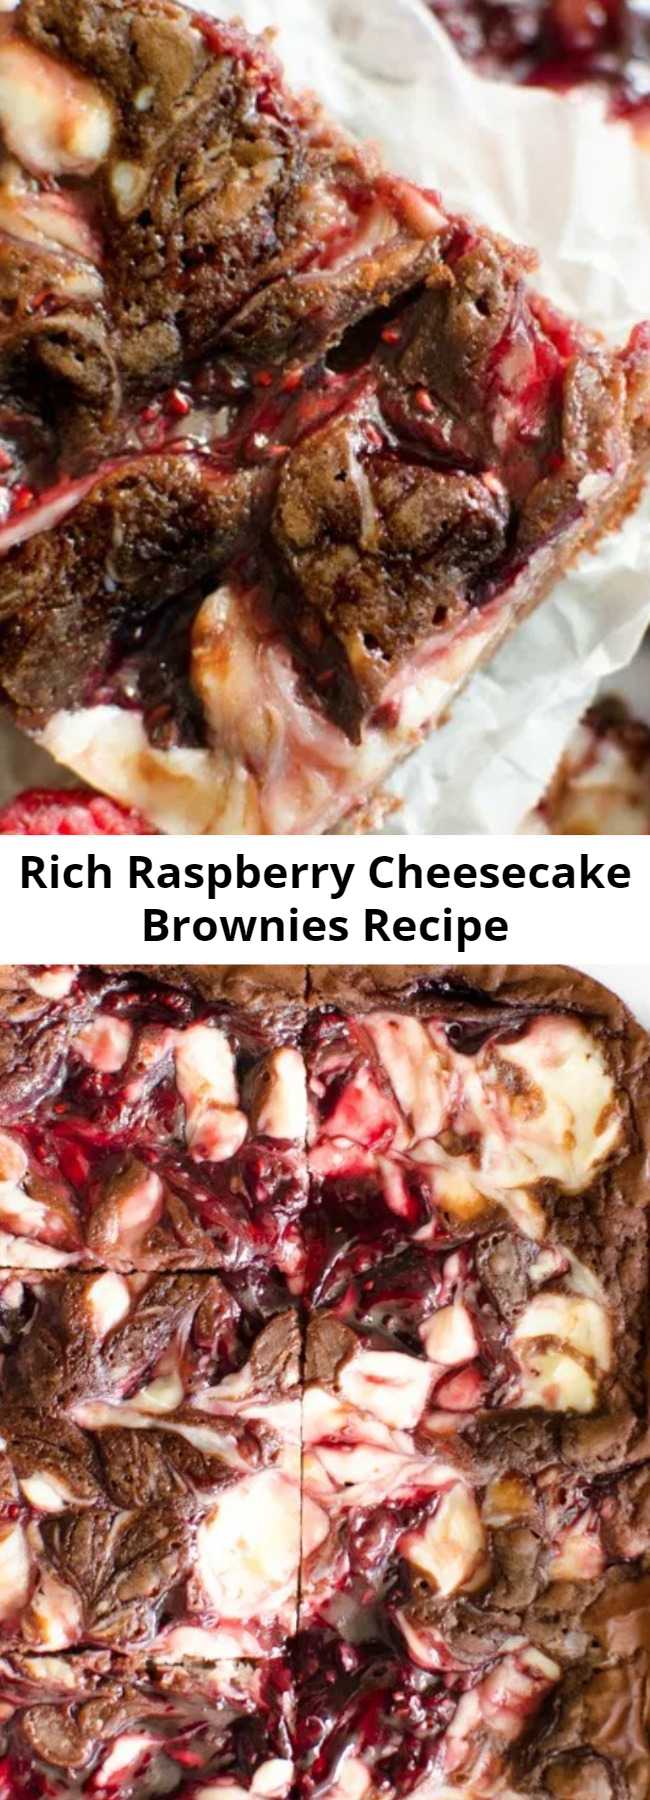 Rich Raspberry Cheesecake Brownies Recipe - Raspberry Cheesecake Brownies are decedent 5 ingredient brownies with a raspberry cheesecake swirl. Quick & easy raspberry cheesecake brownie recipe that looks and tastes incredible!